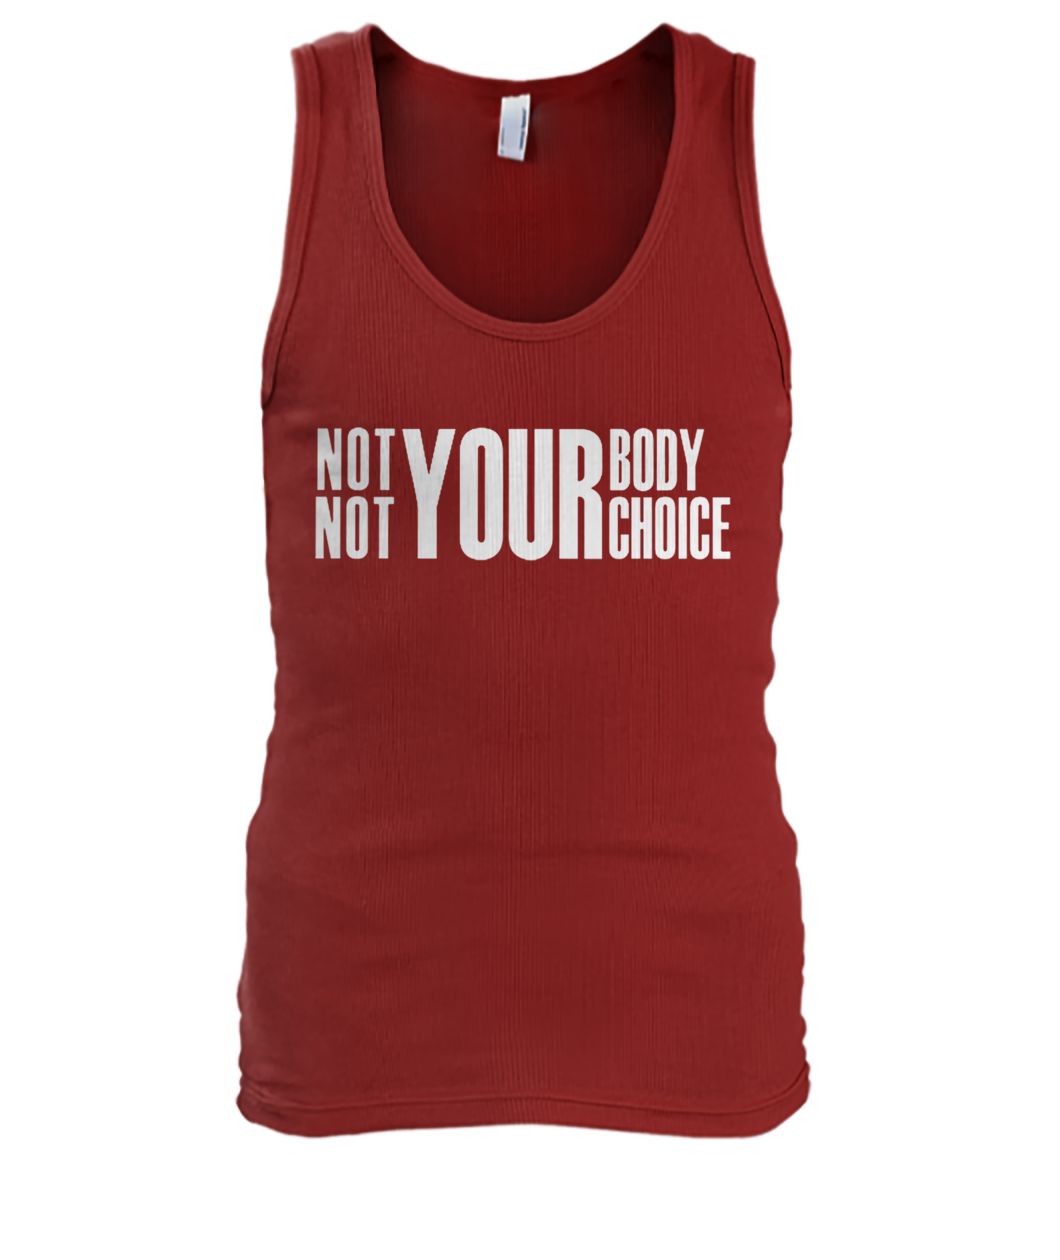 Not your body not your choice men's tank top